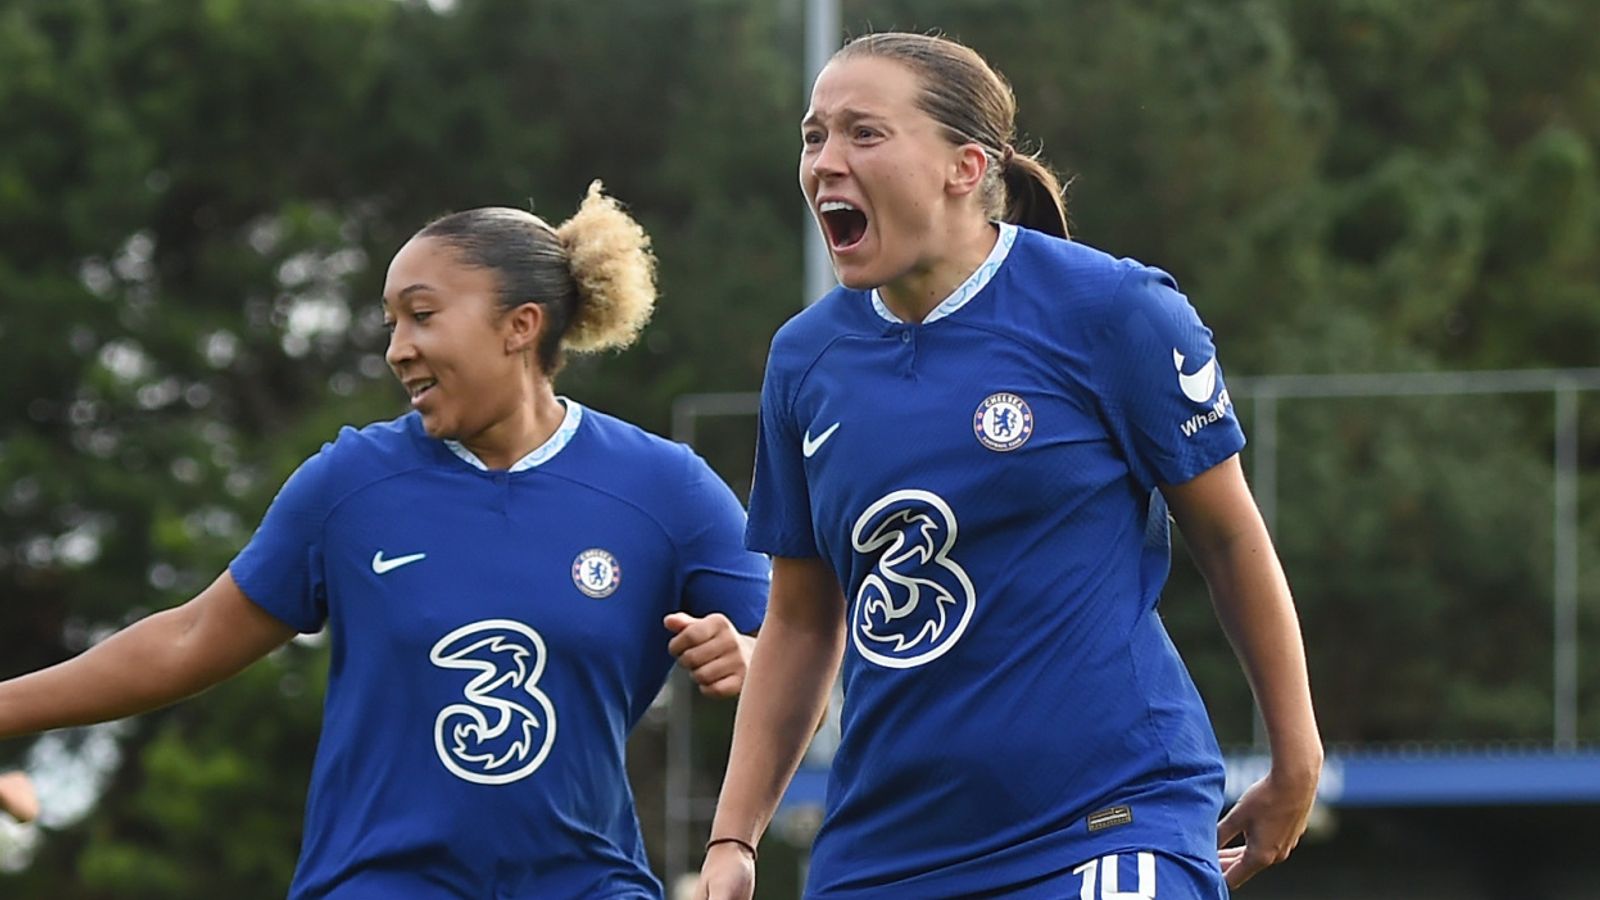 Women’s Super League talking points: Chelsea show their champions mentality in victory over Manchester City while Jess Park stars for Everton